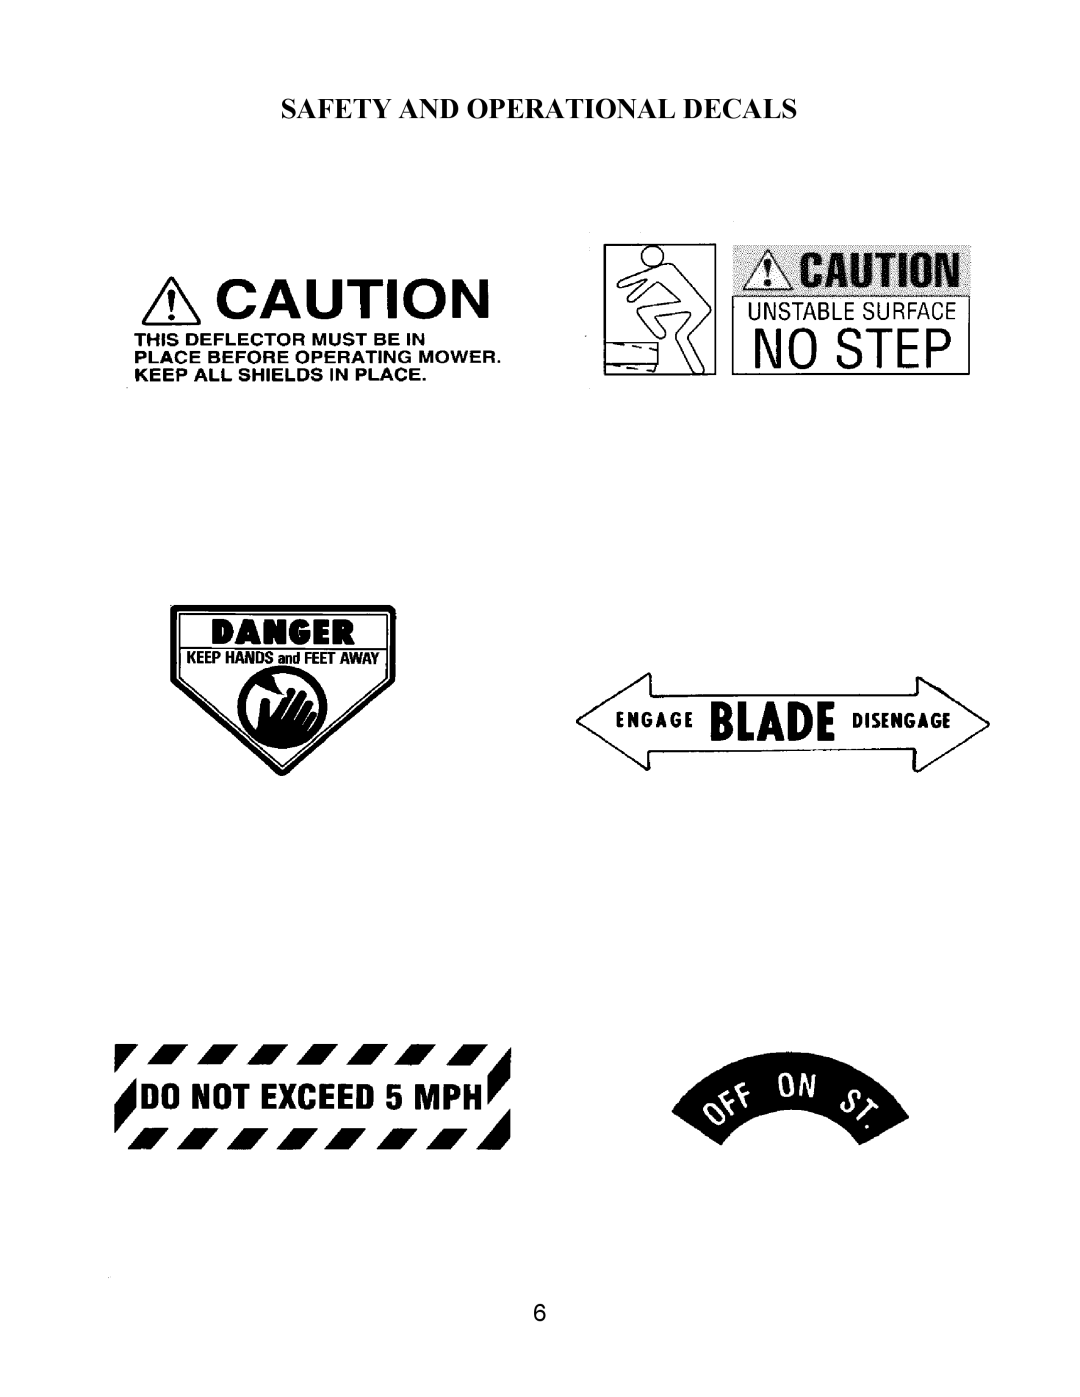 Swisher T1360 owner manual Caution Decal, Danger Decal, Blade Decal, Speed Decal, Engine Power Decal, No Step Decal 